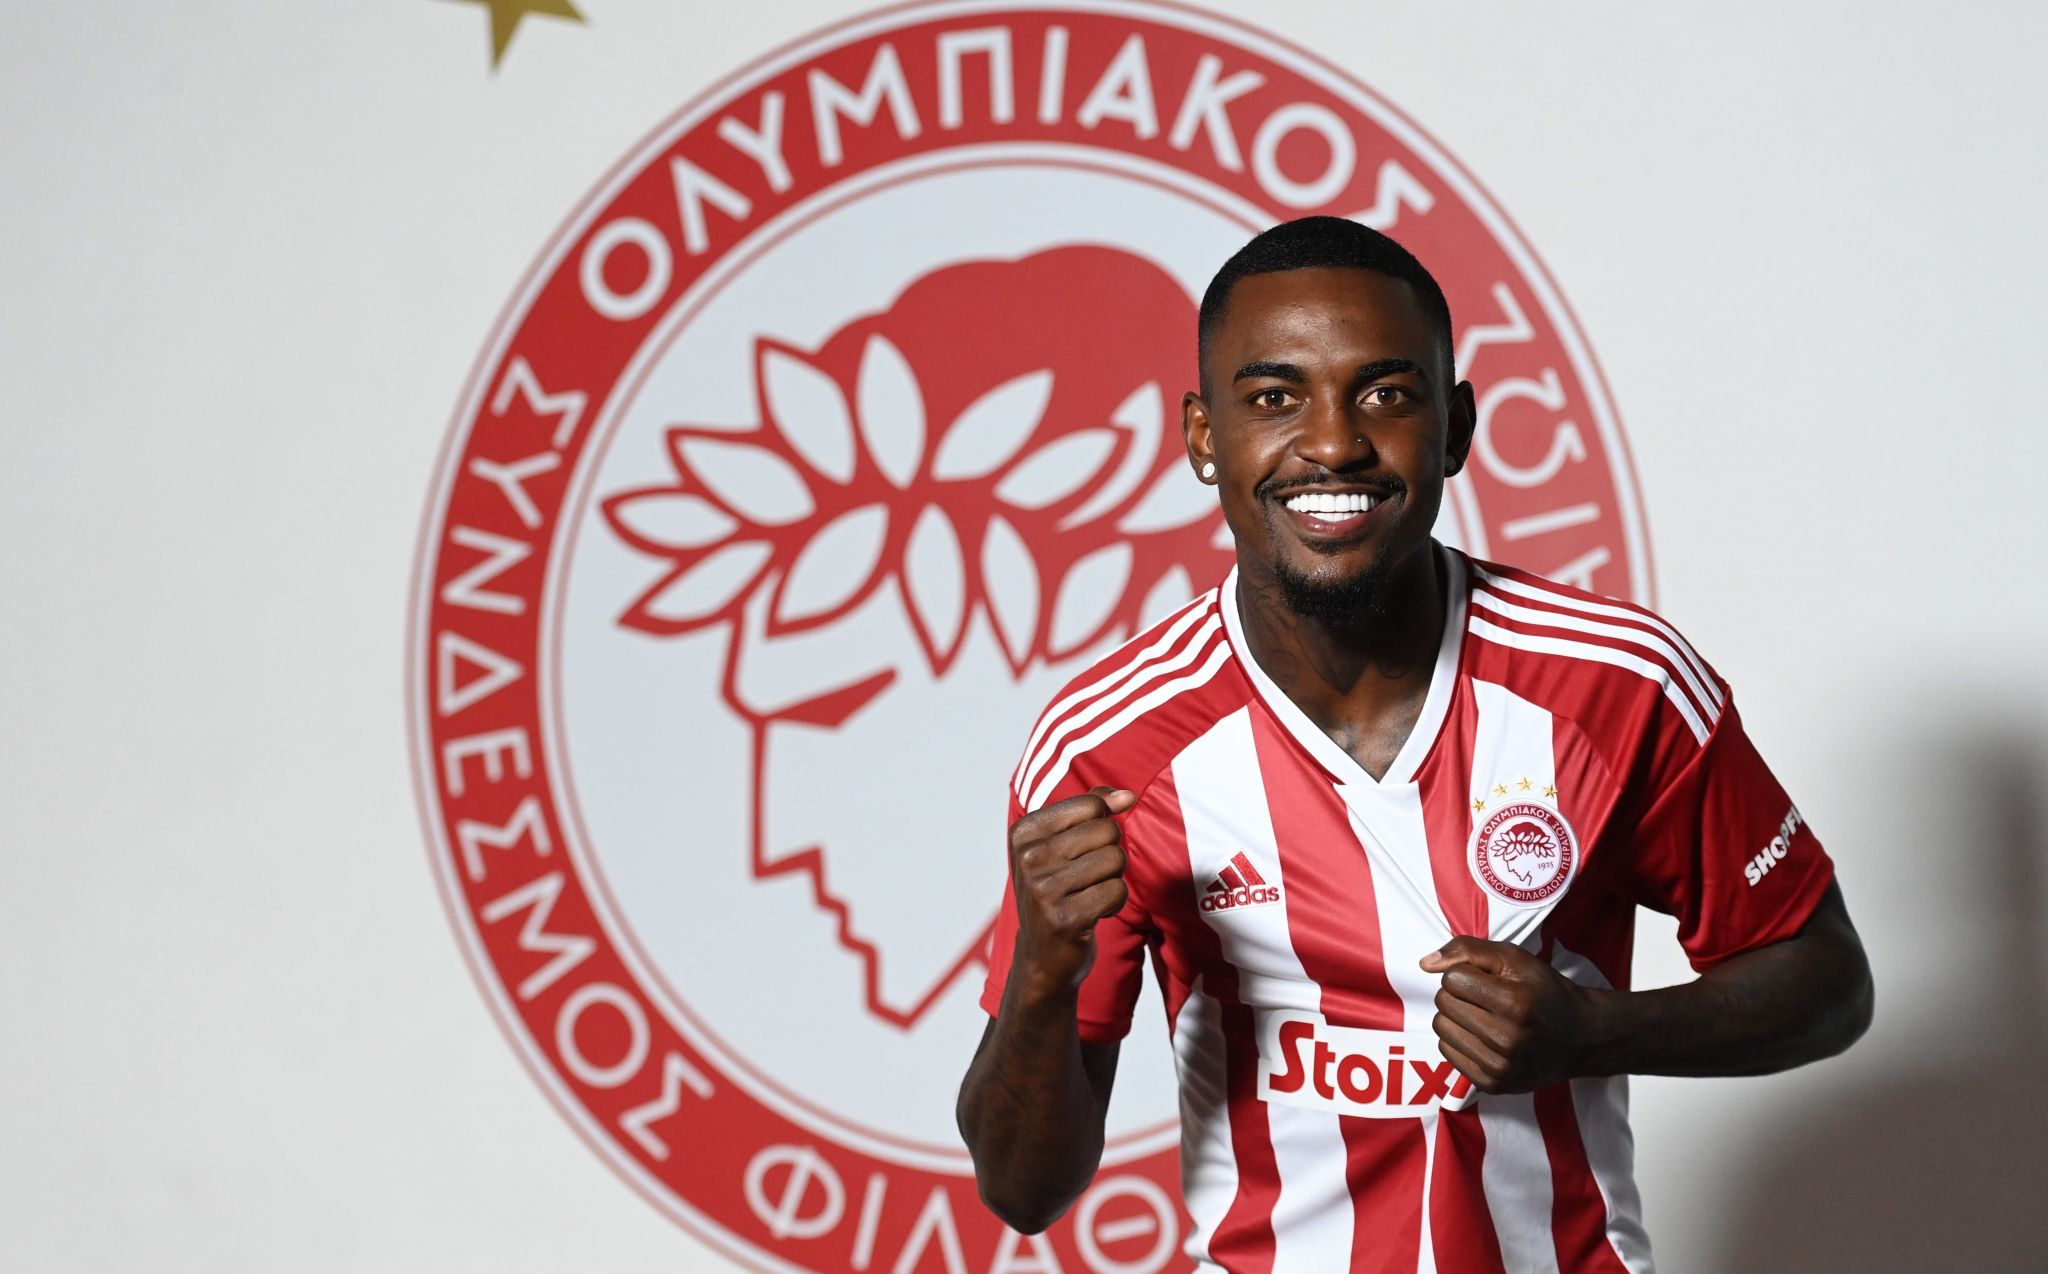 Ramon signs with Olympiacos